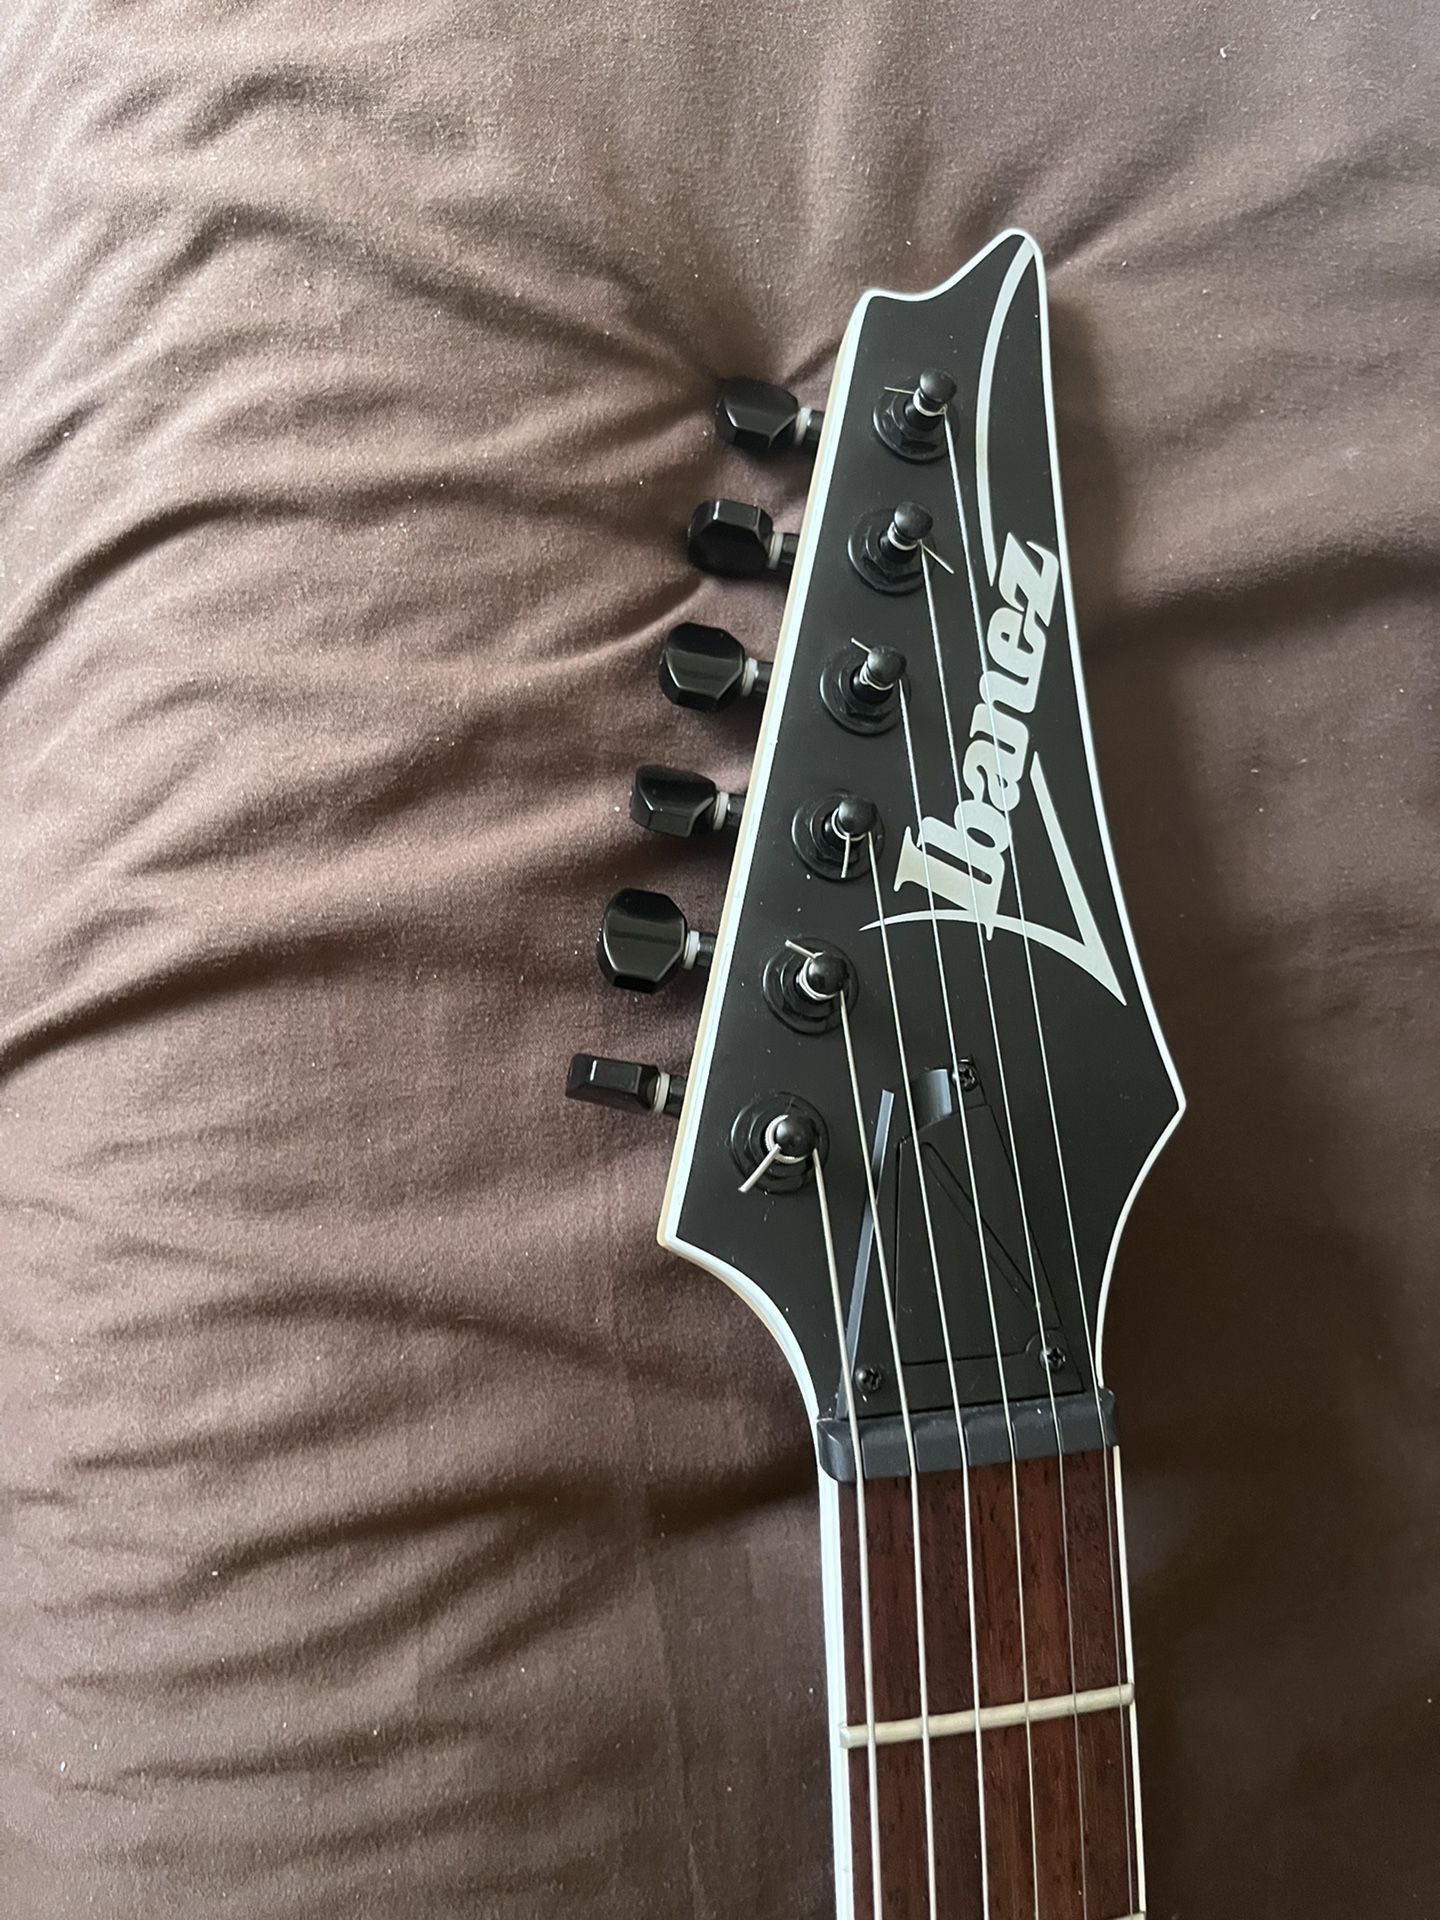 Ibanez RG421EX Signature ZW Emg 81/85 With Locking Tuners (not Installed)